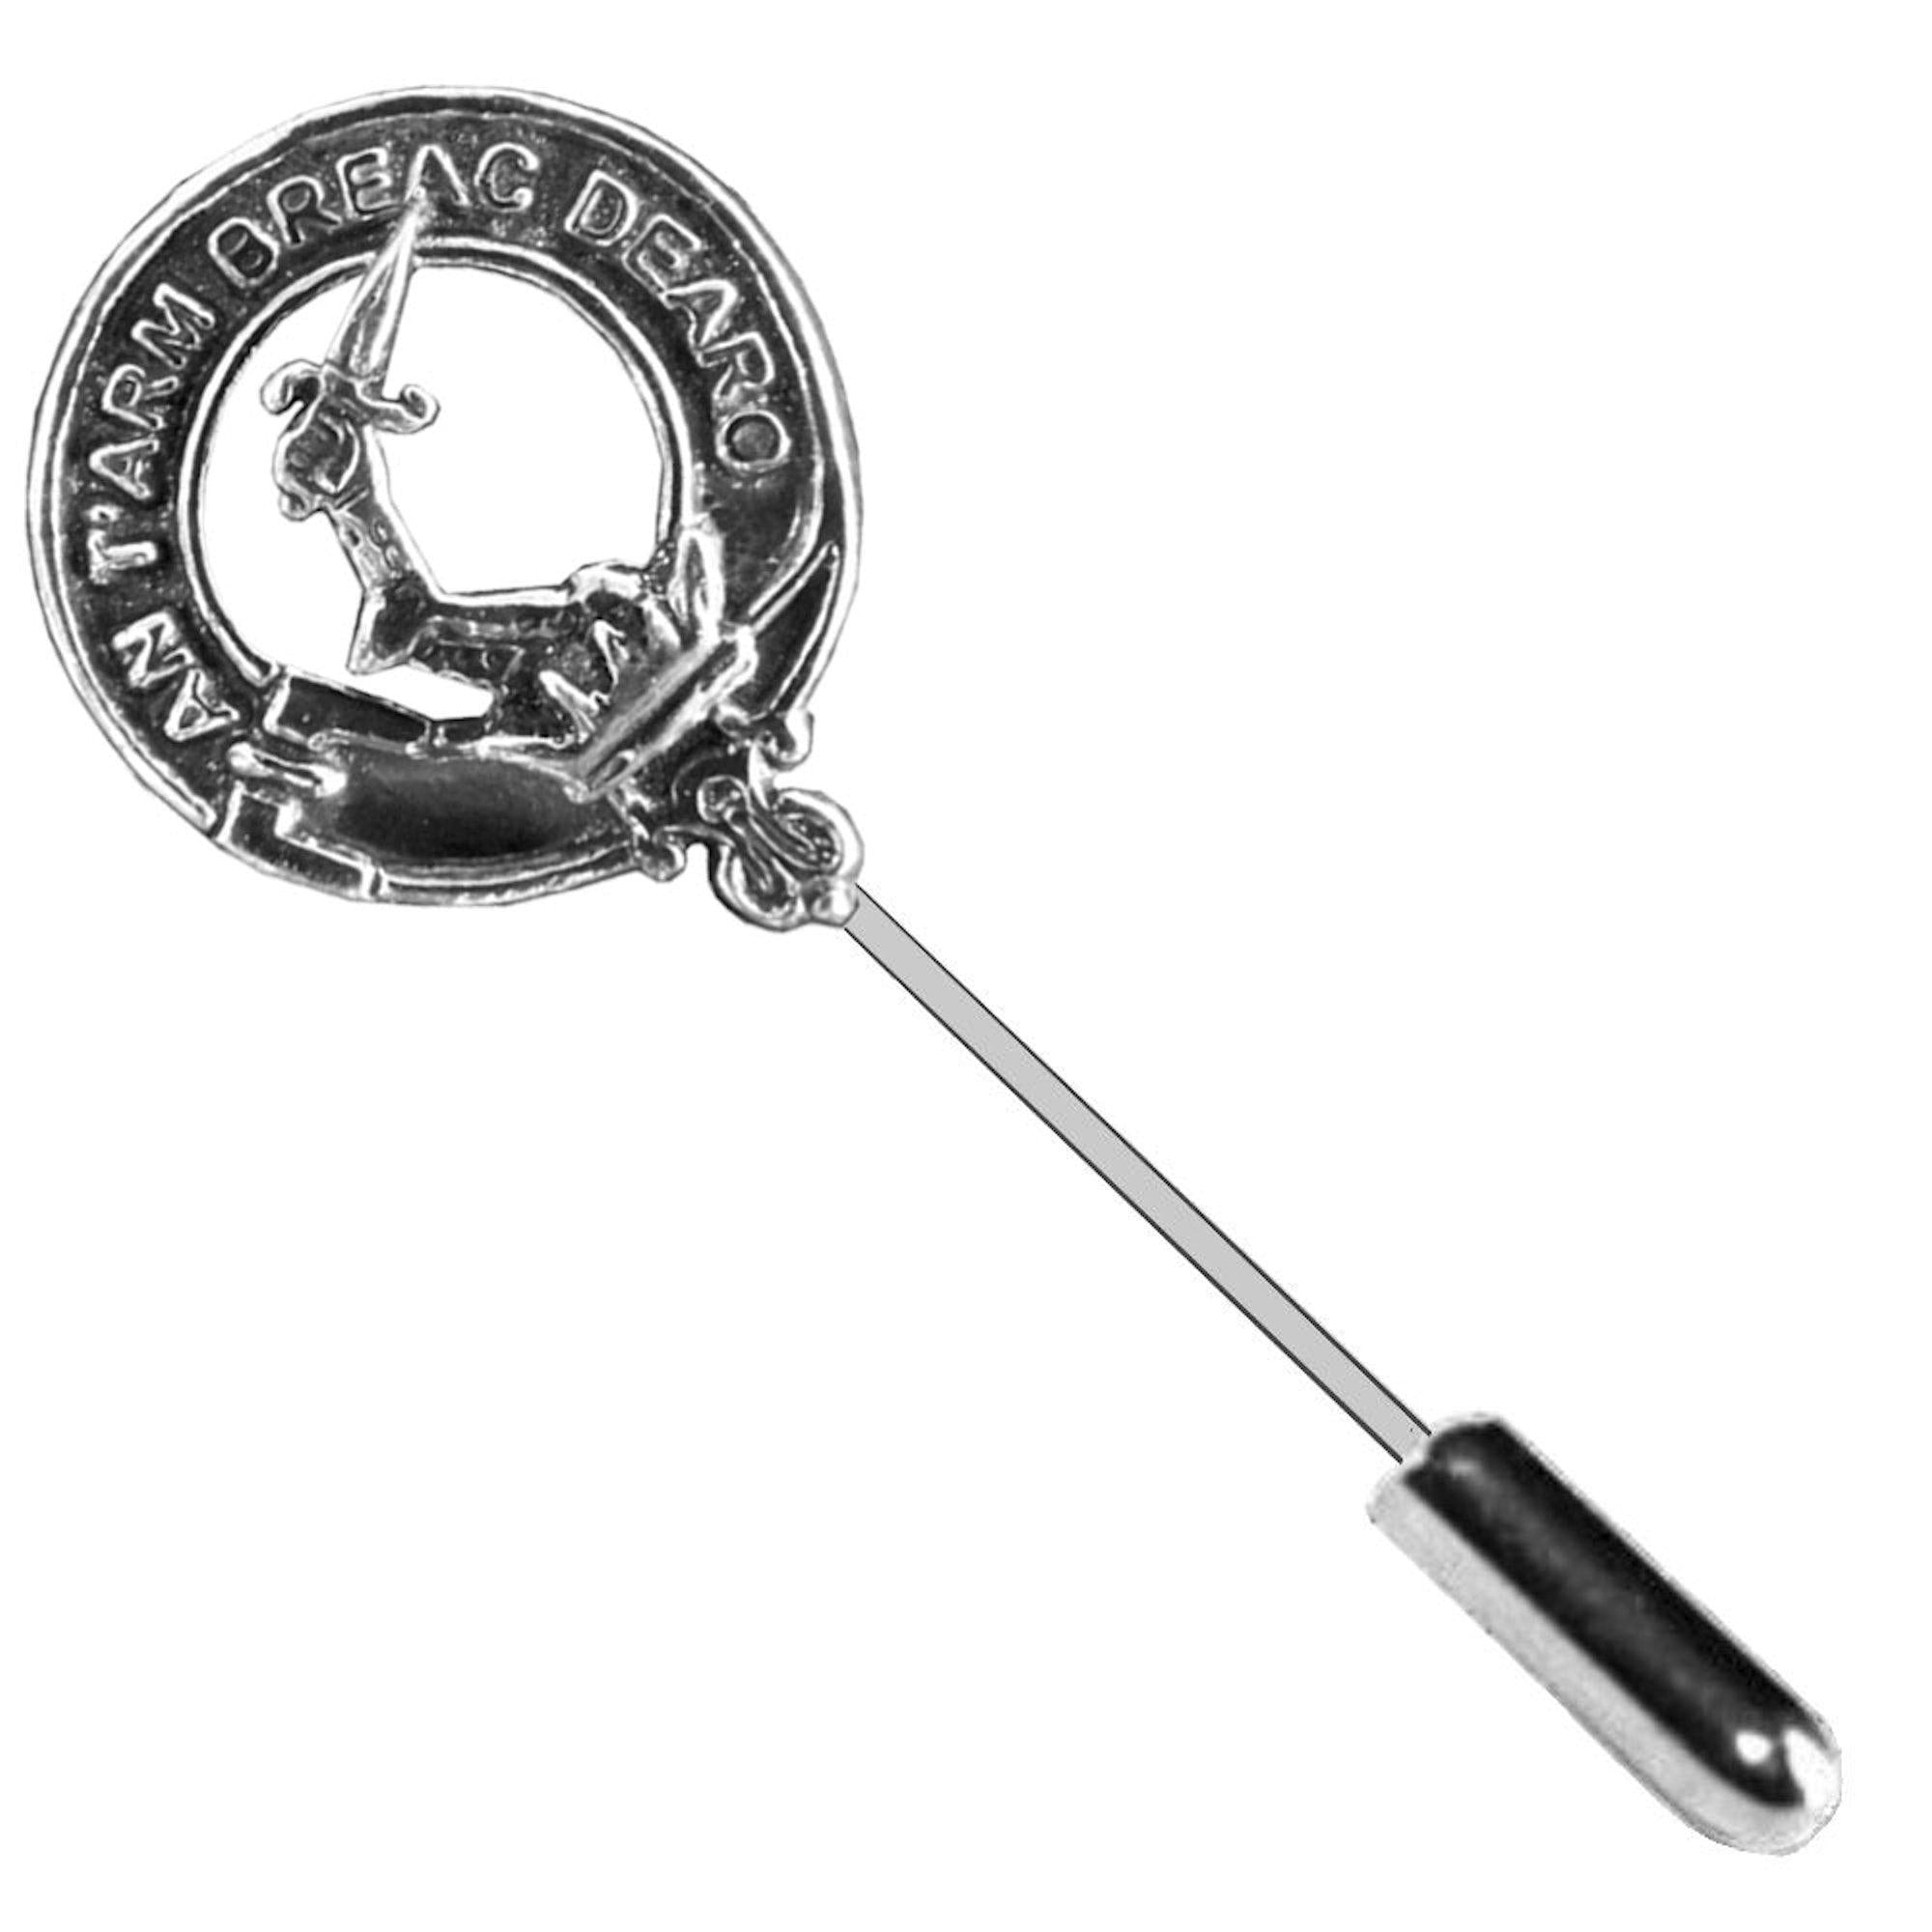 MacQuarrie Clan Crest Stick or Cravat pin, Sterling Silver